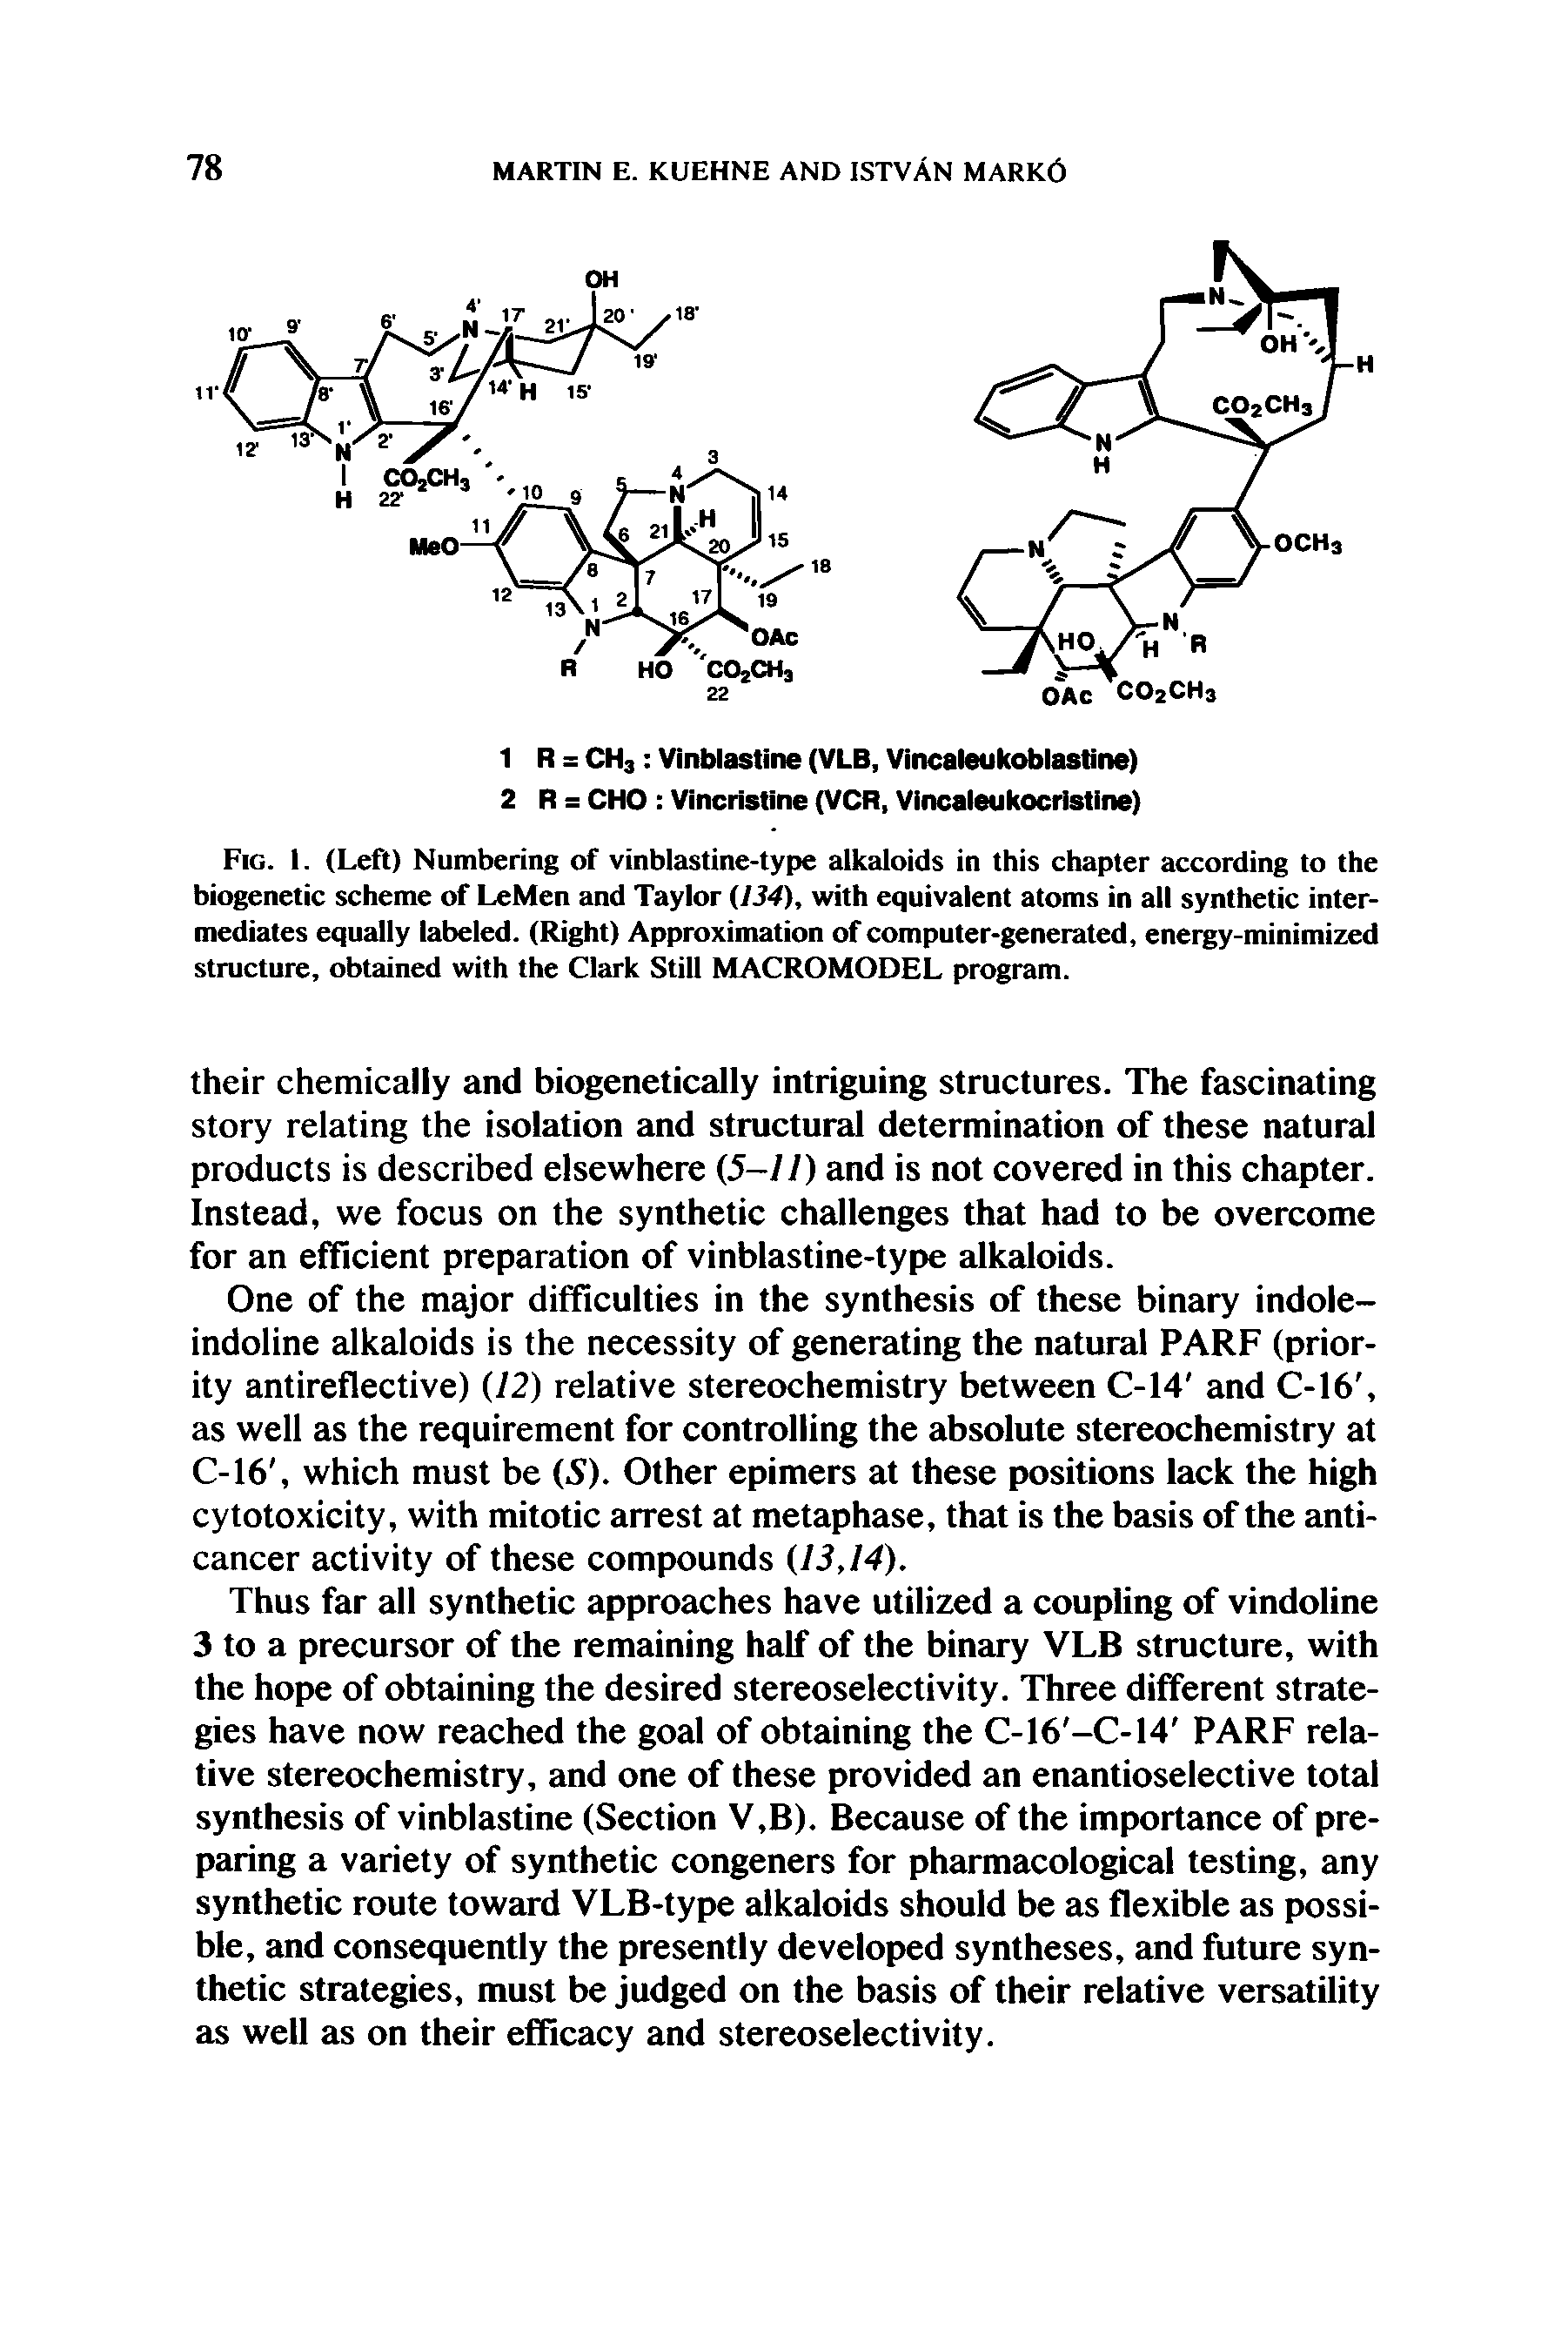 Fig. I. (Left) Numbering of vinblastine-type alkaloids in this chapter according to the biogenetic scheme of LeMen and Taylor (134), with equivalent atoms in all synthetic intermediates equally labeled. (Right) Approximation of computer-generated, energy-minimized structure, obtained with the Clark Still MACROMODEL program.